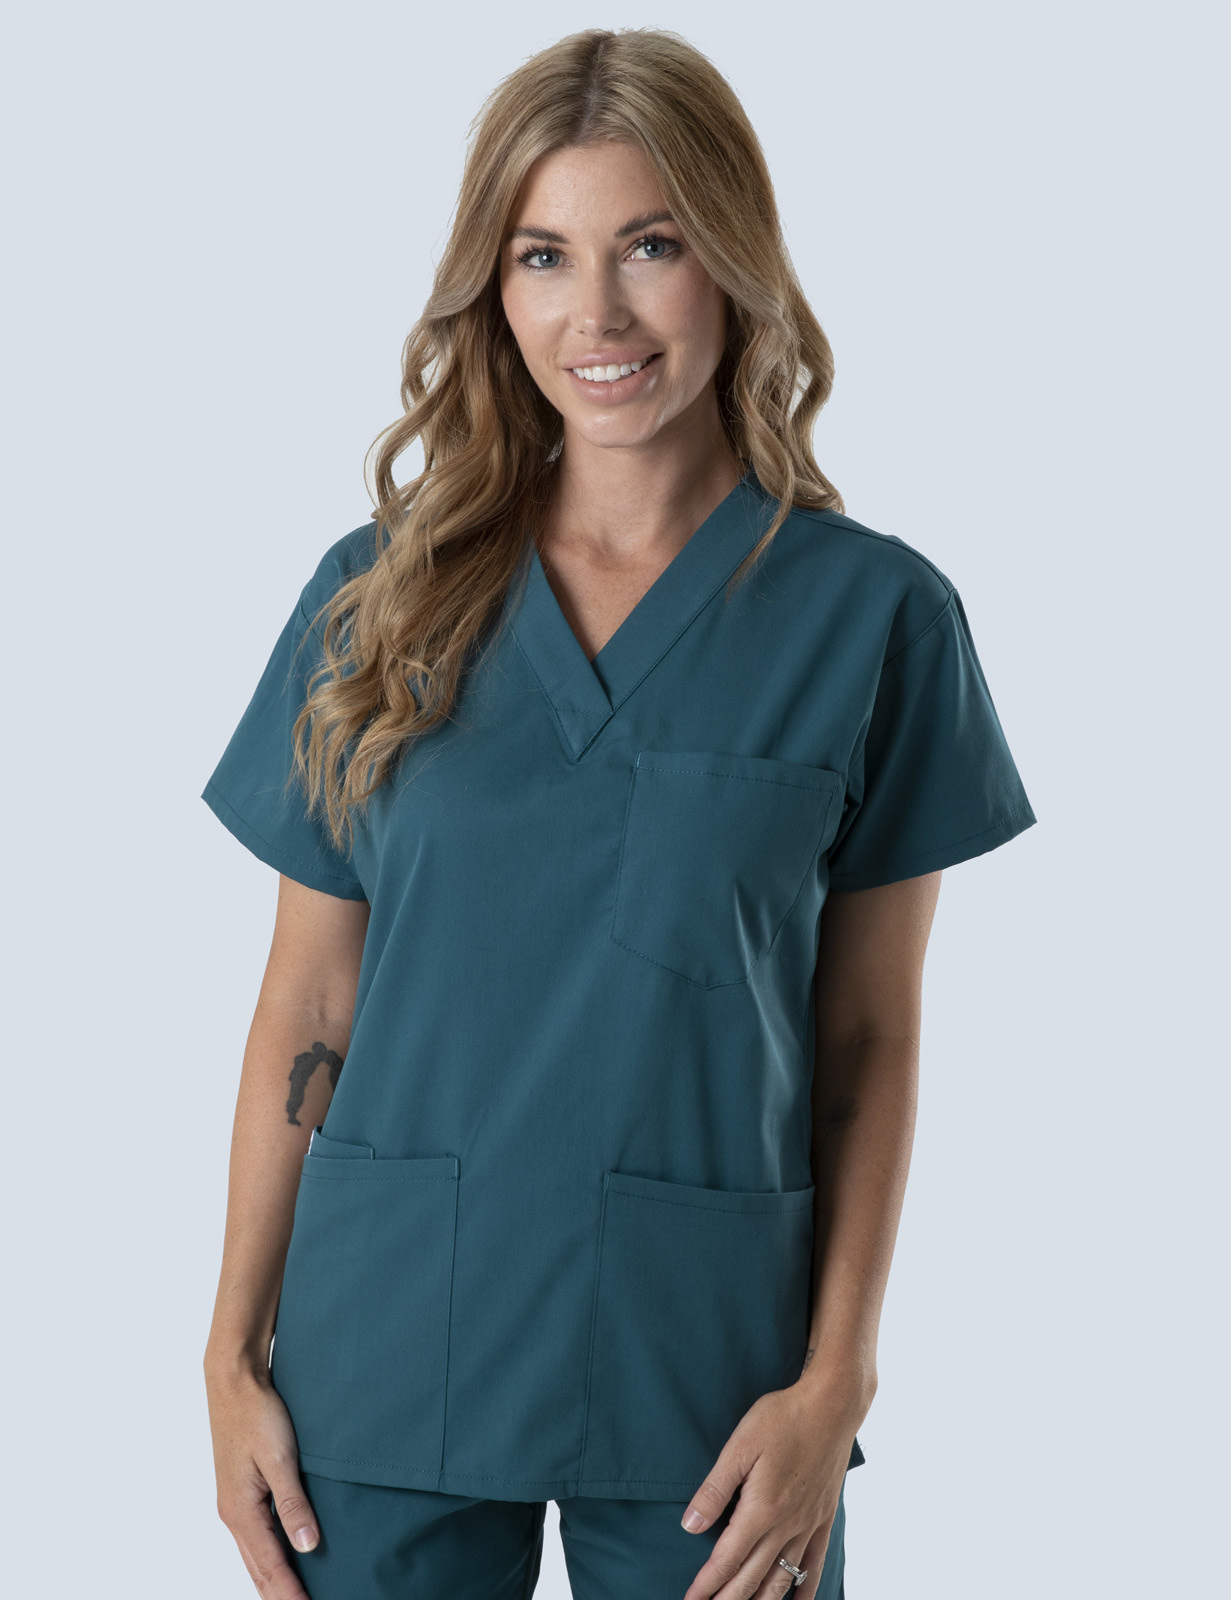 Canberra Hospital - Physiotherapist (4 Pocket Scrub Top in Caribbean incl Logos)